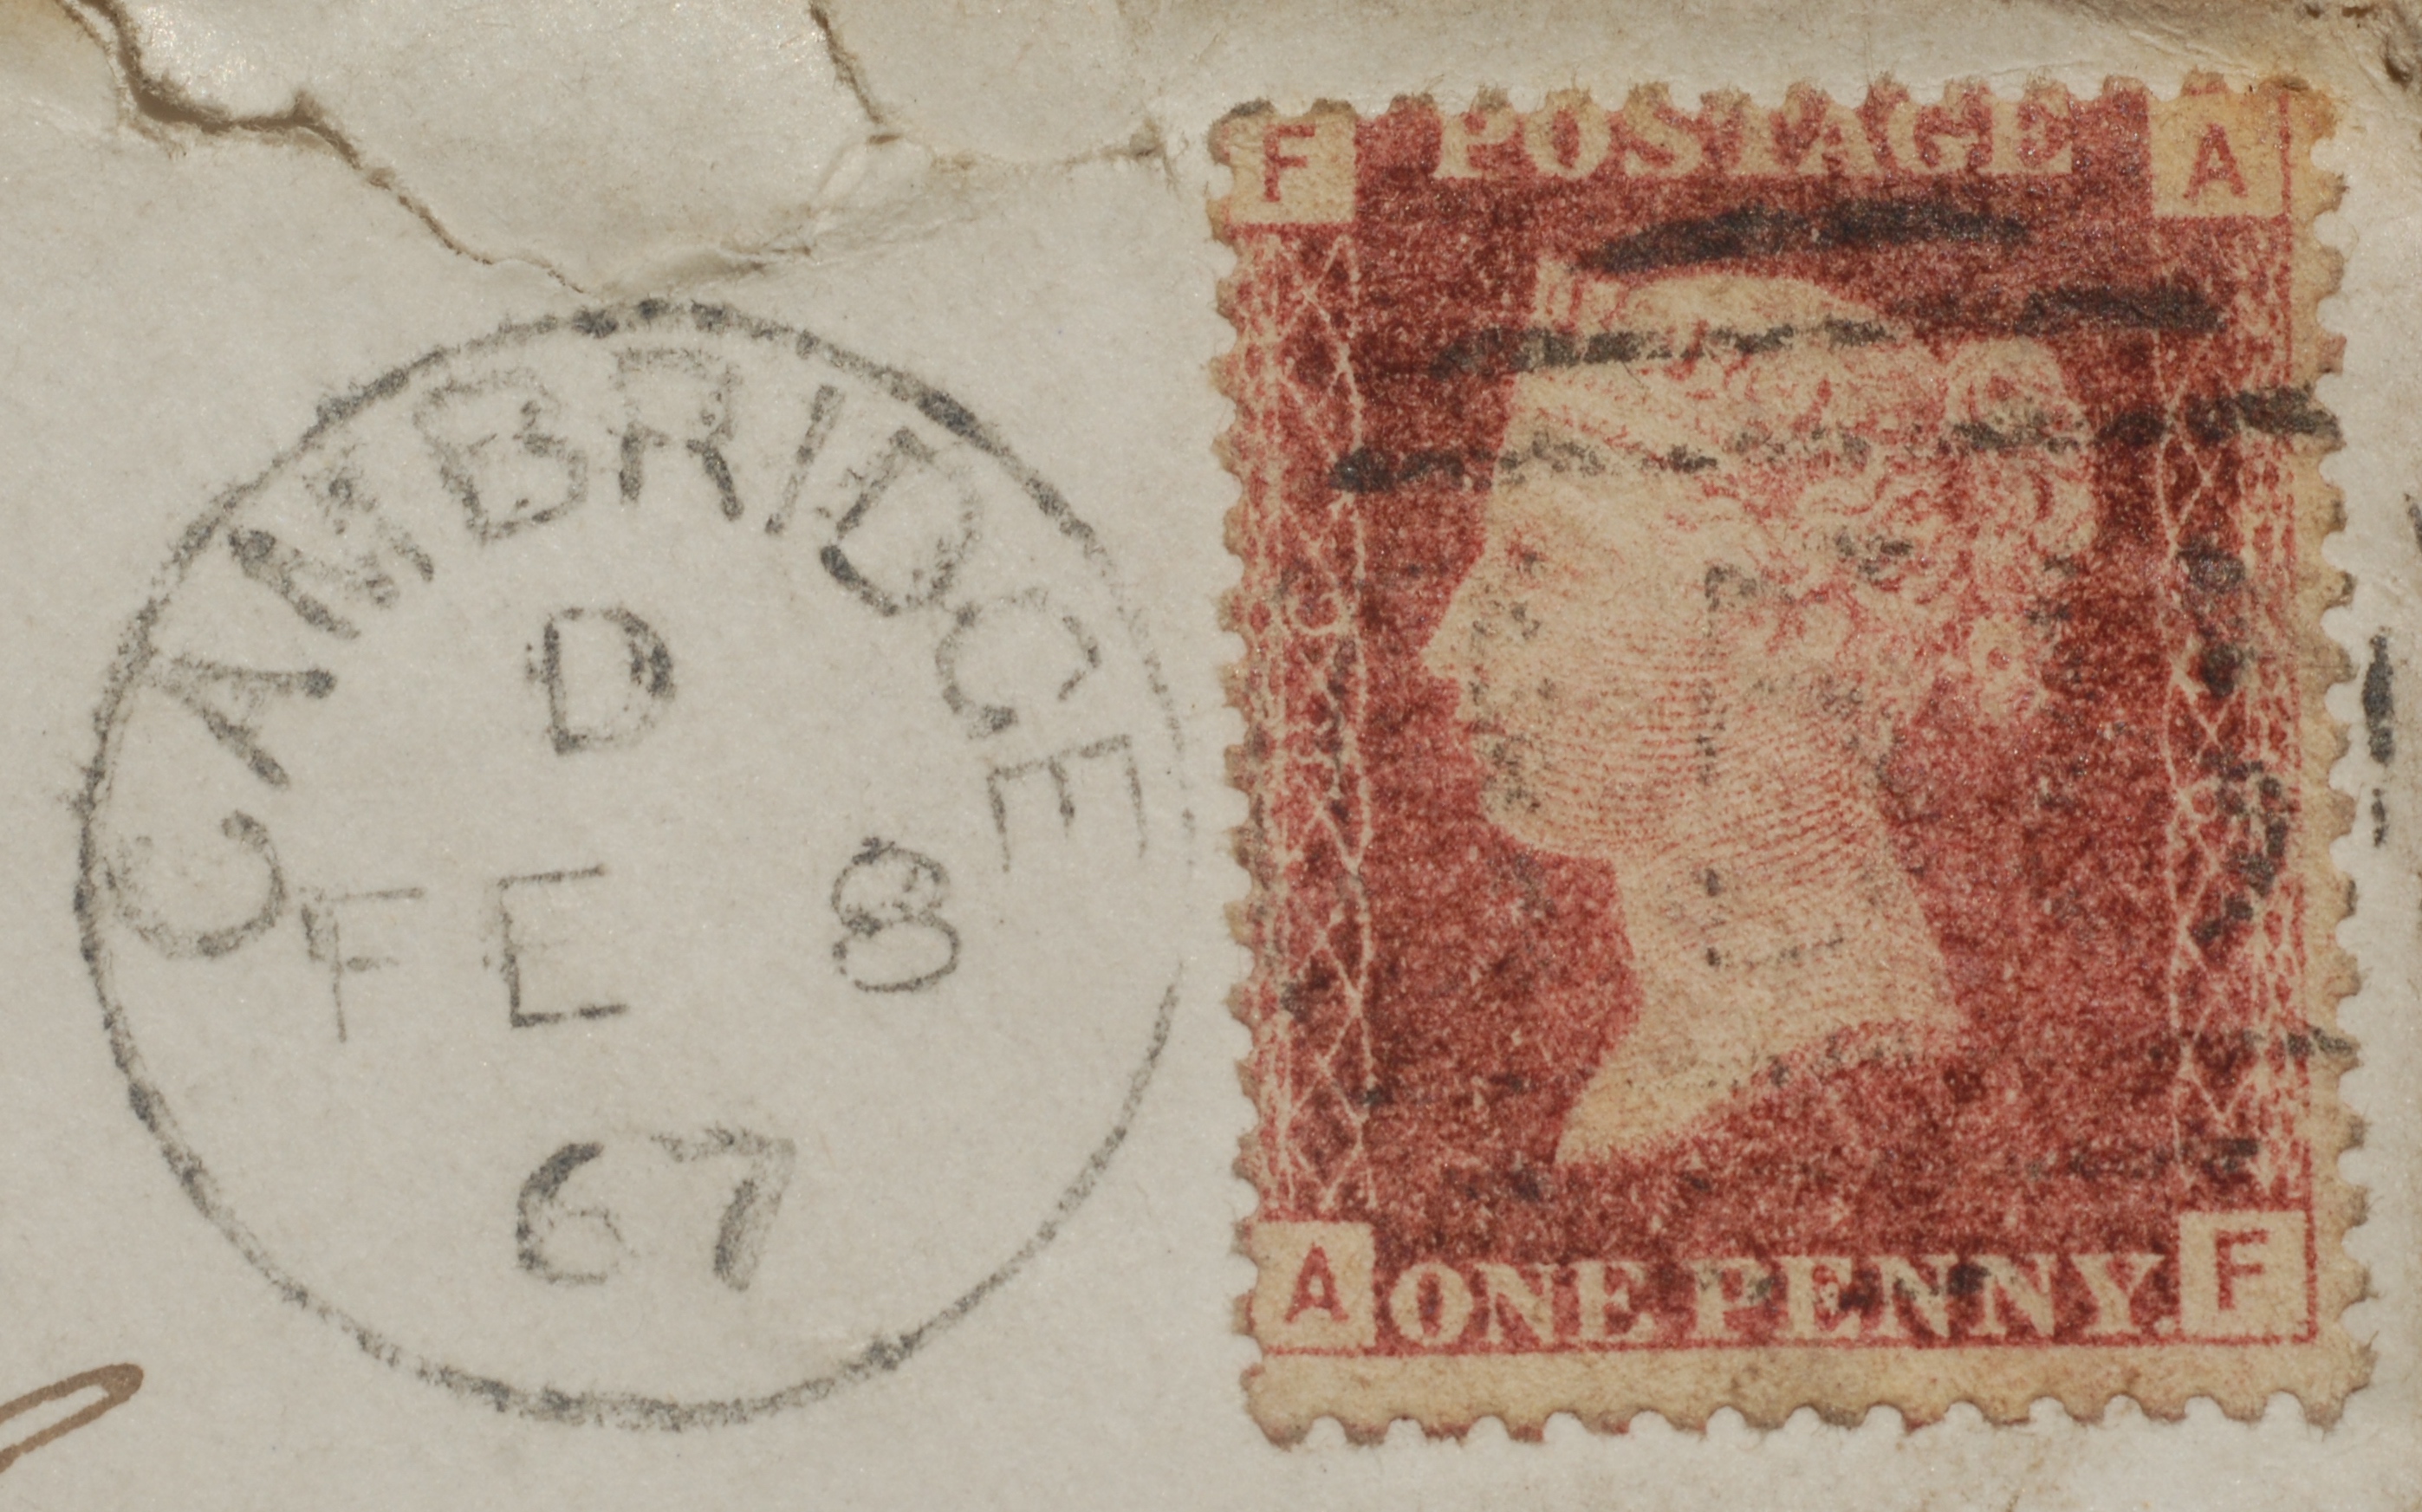 A penny red Victorian stamp